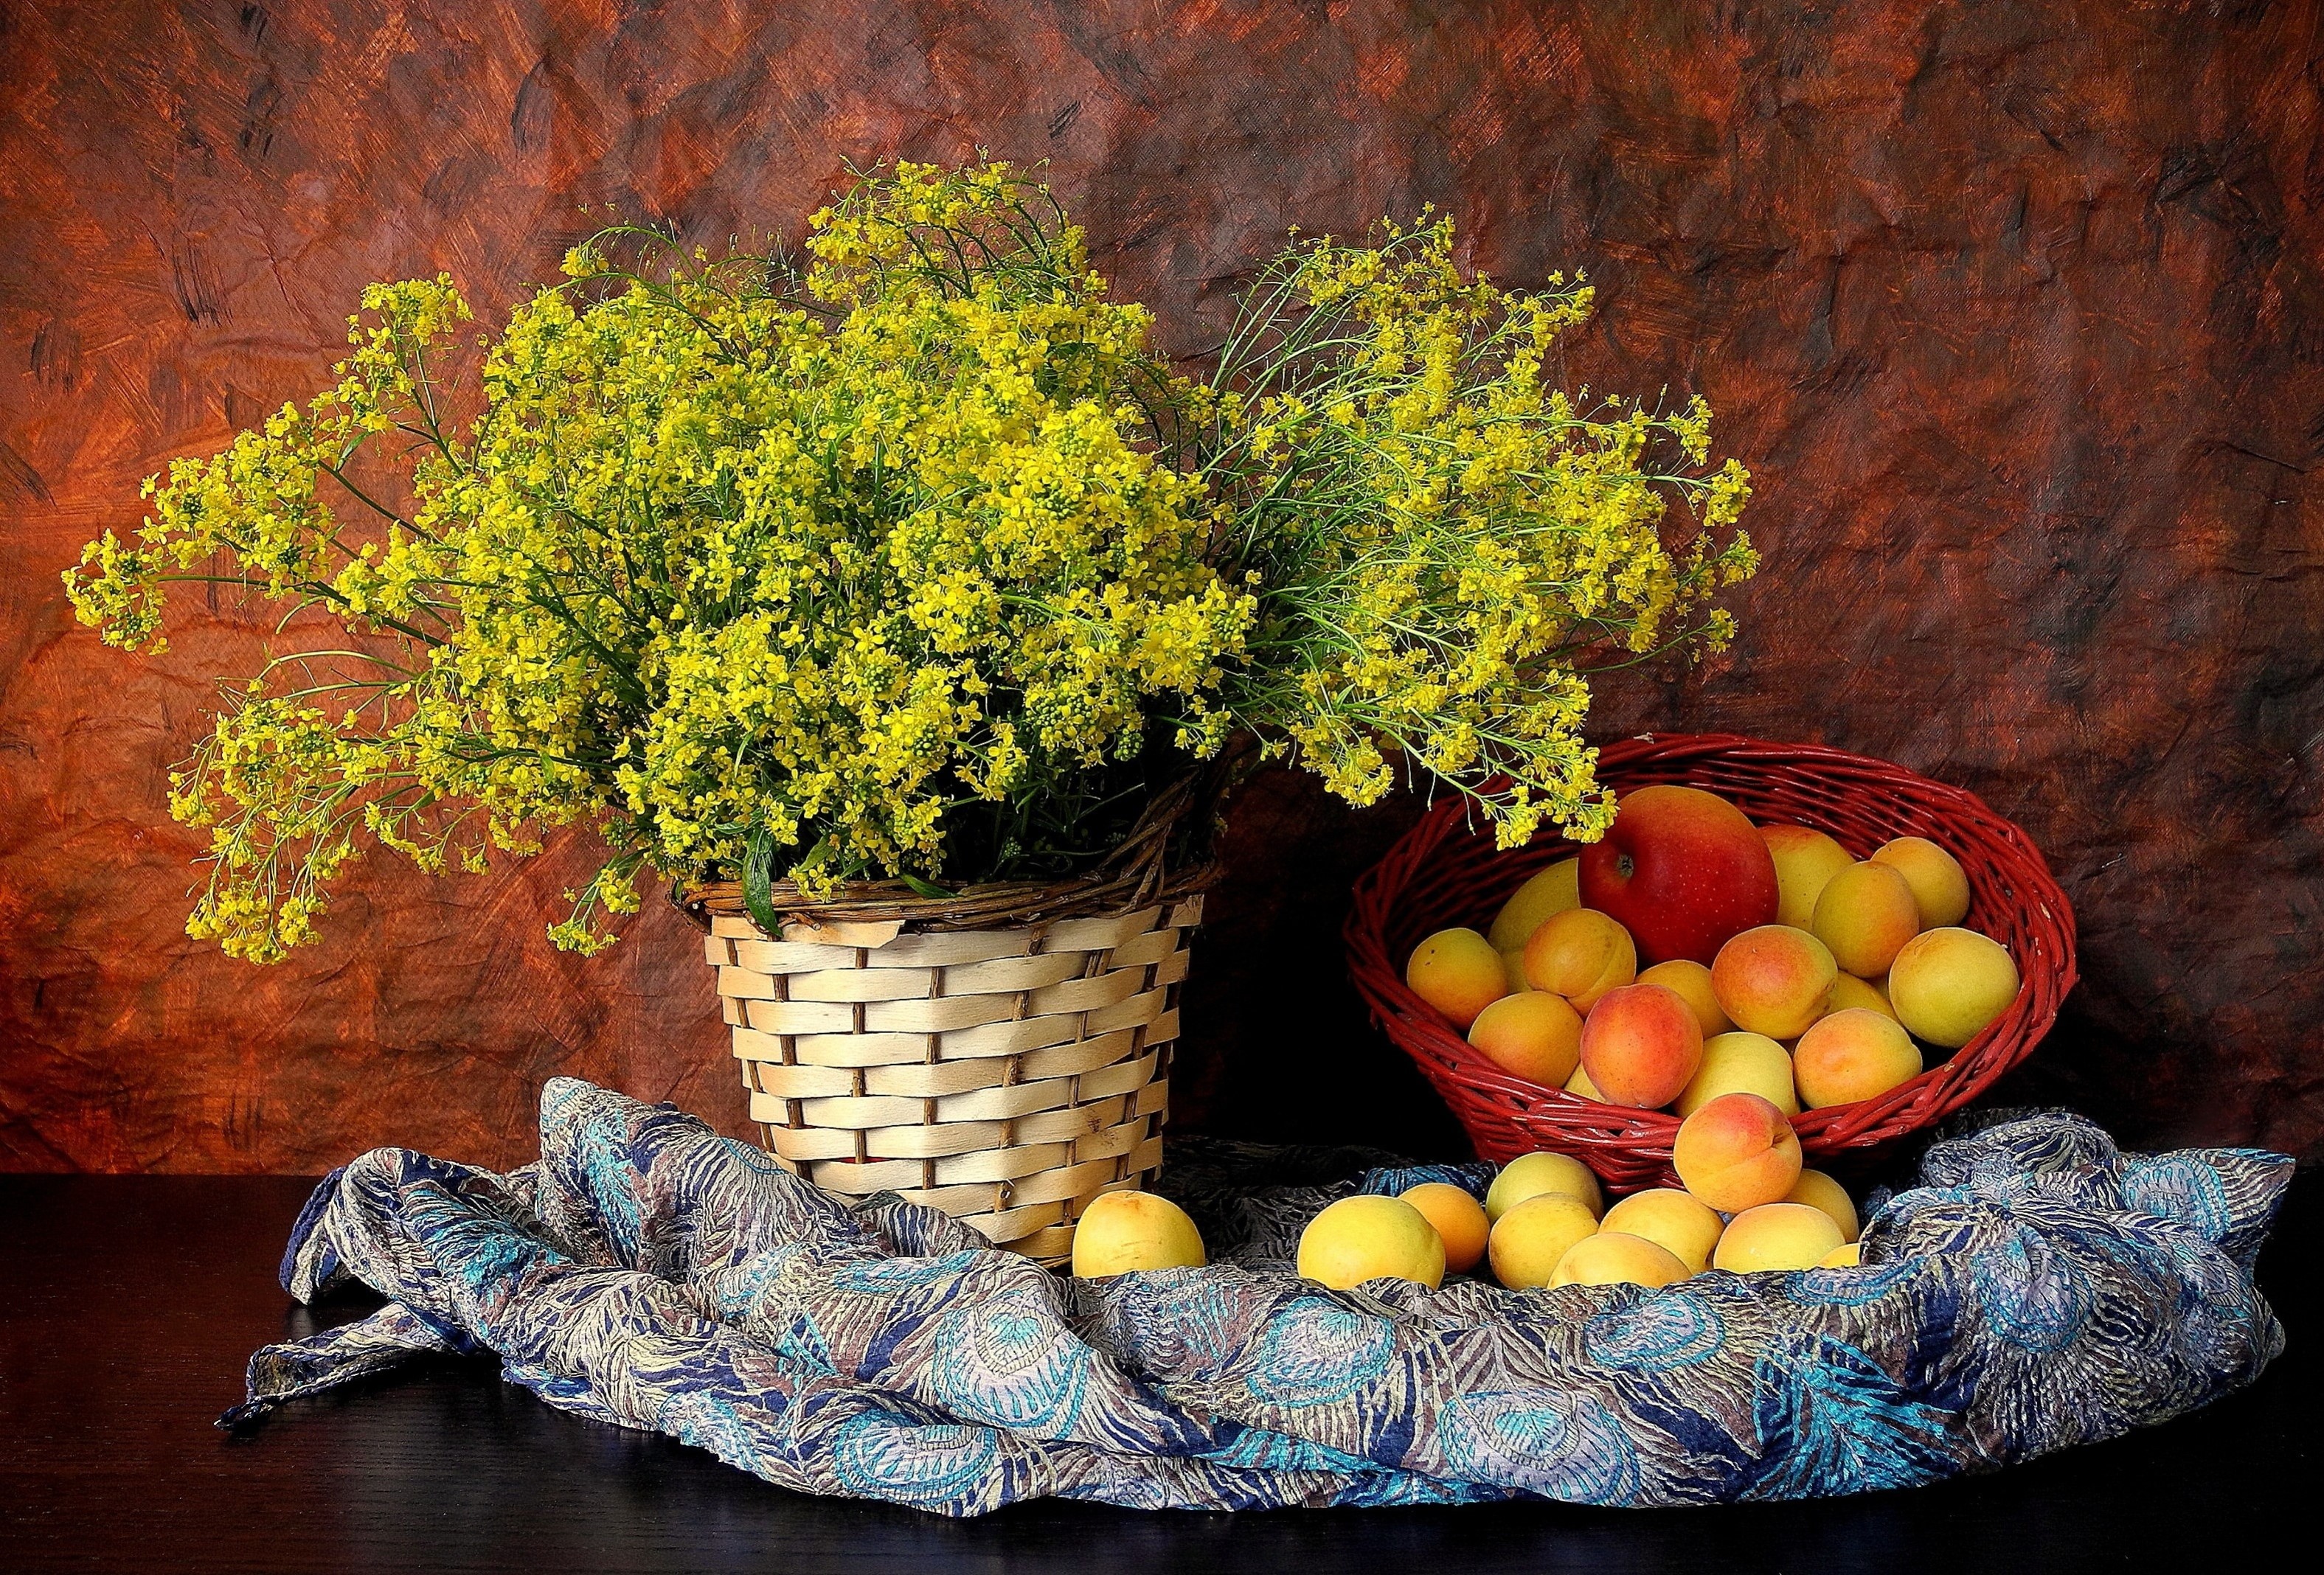 photography, still life, basket, flower, fruit, nectarine, peach, scarf, yellow flower cell phone wallpapers